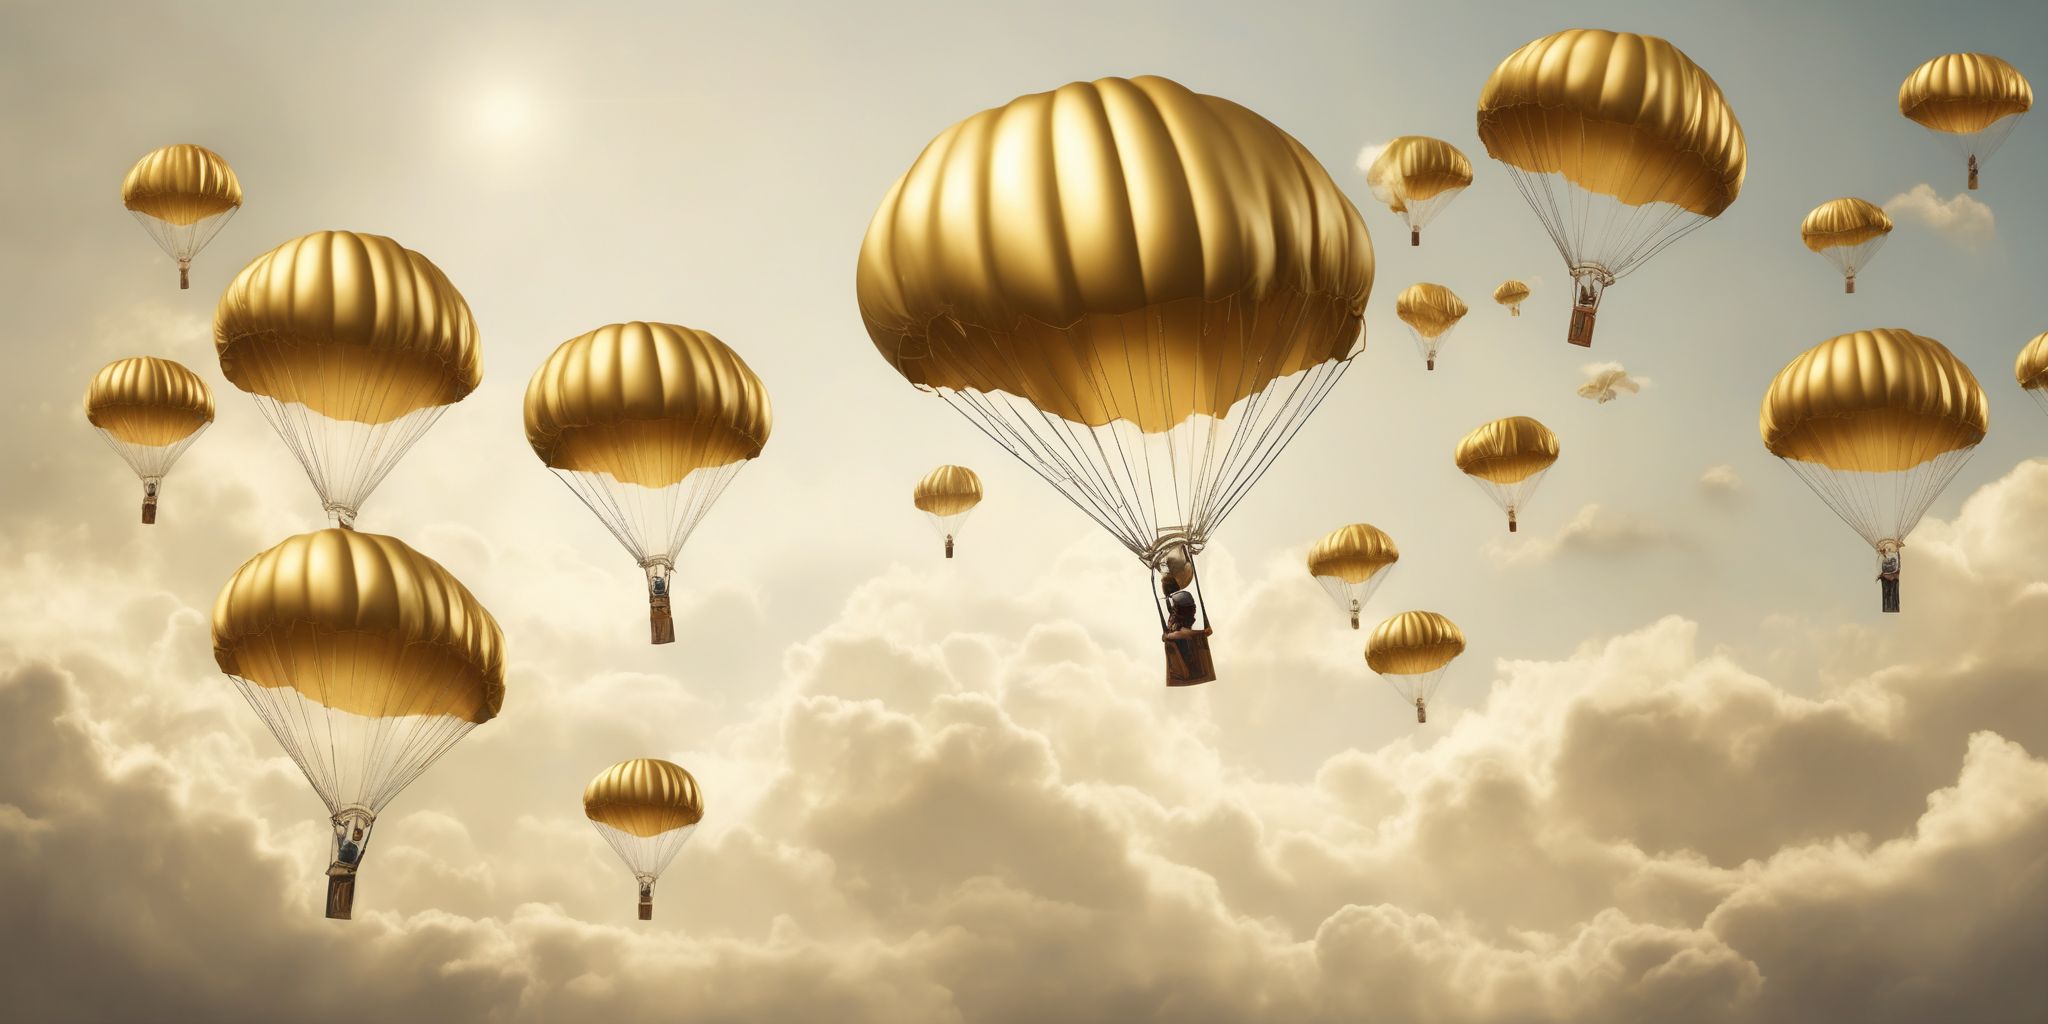 Golden parachute  in realistic, photographic style